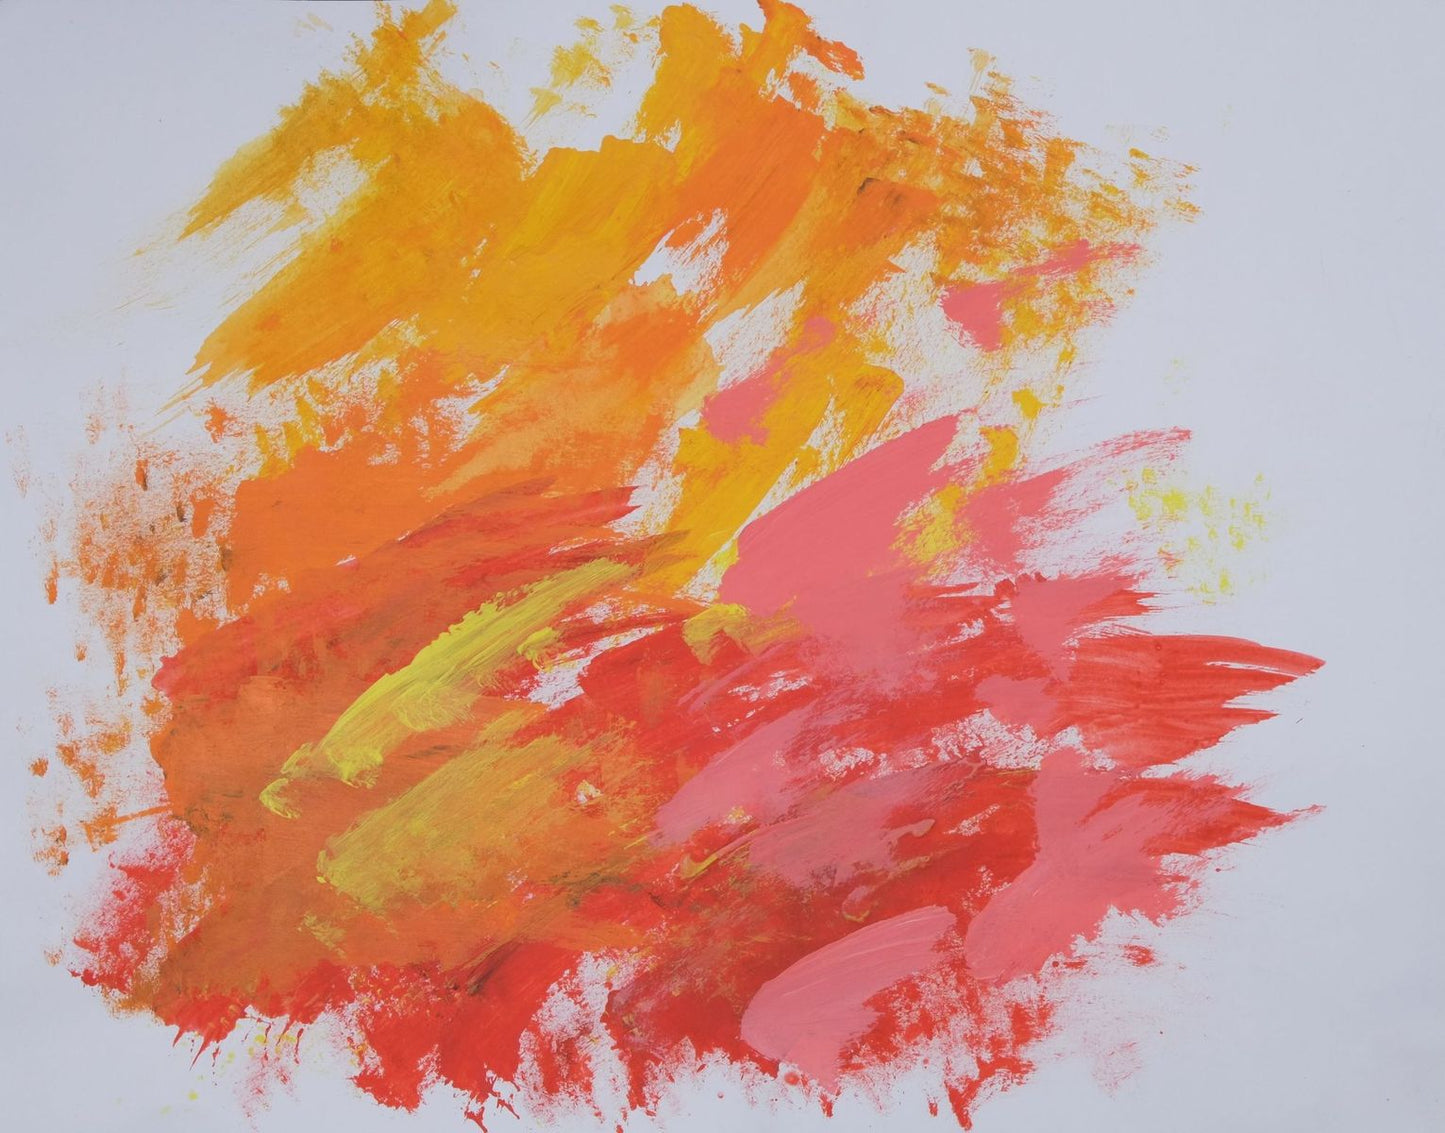 Acrylic on paper artwork with white background and broad orange, yellow, pink and red brushstrokes 